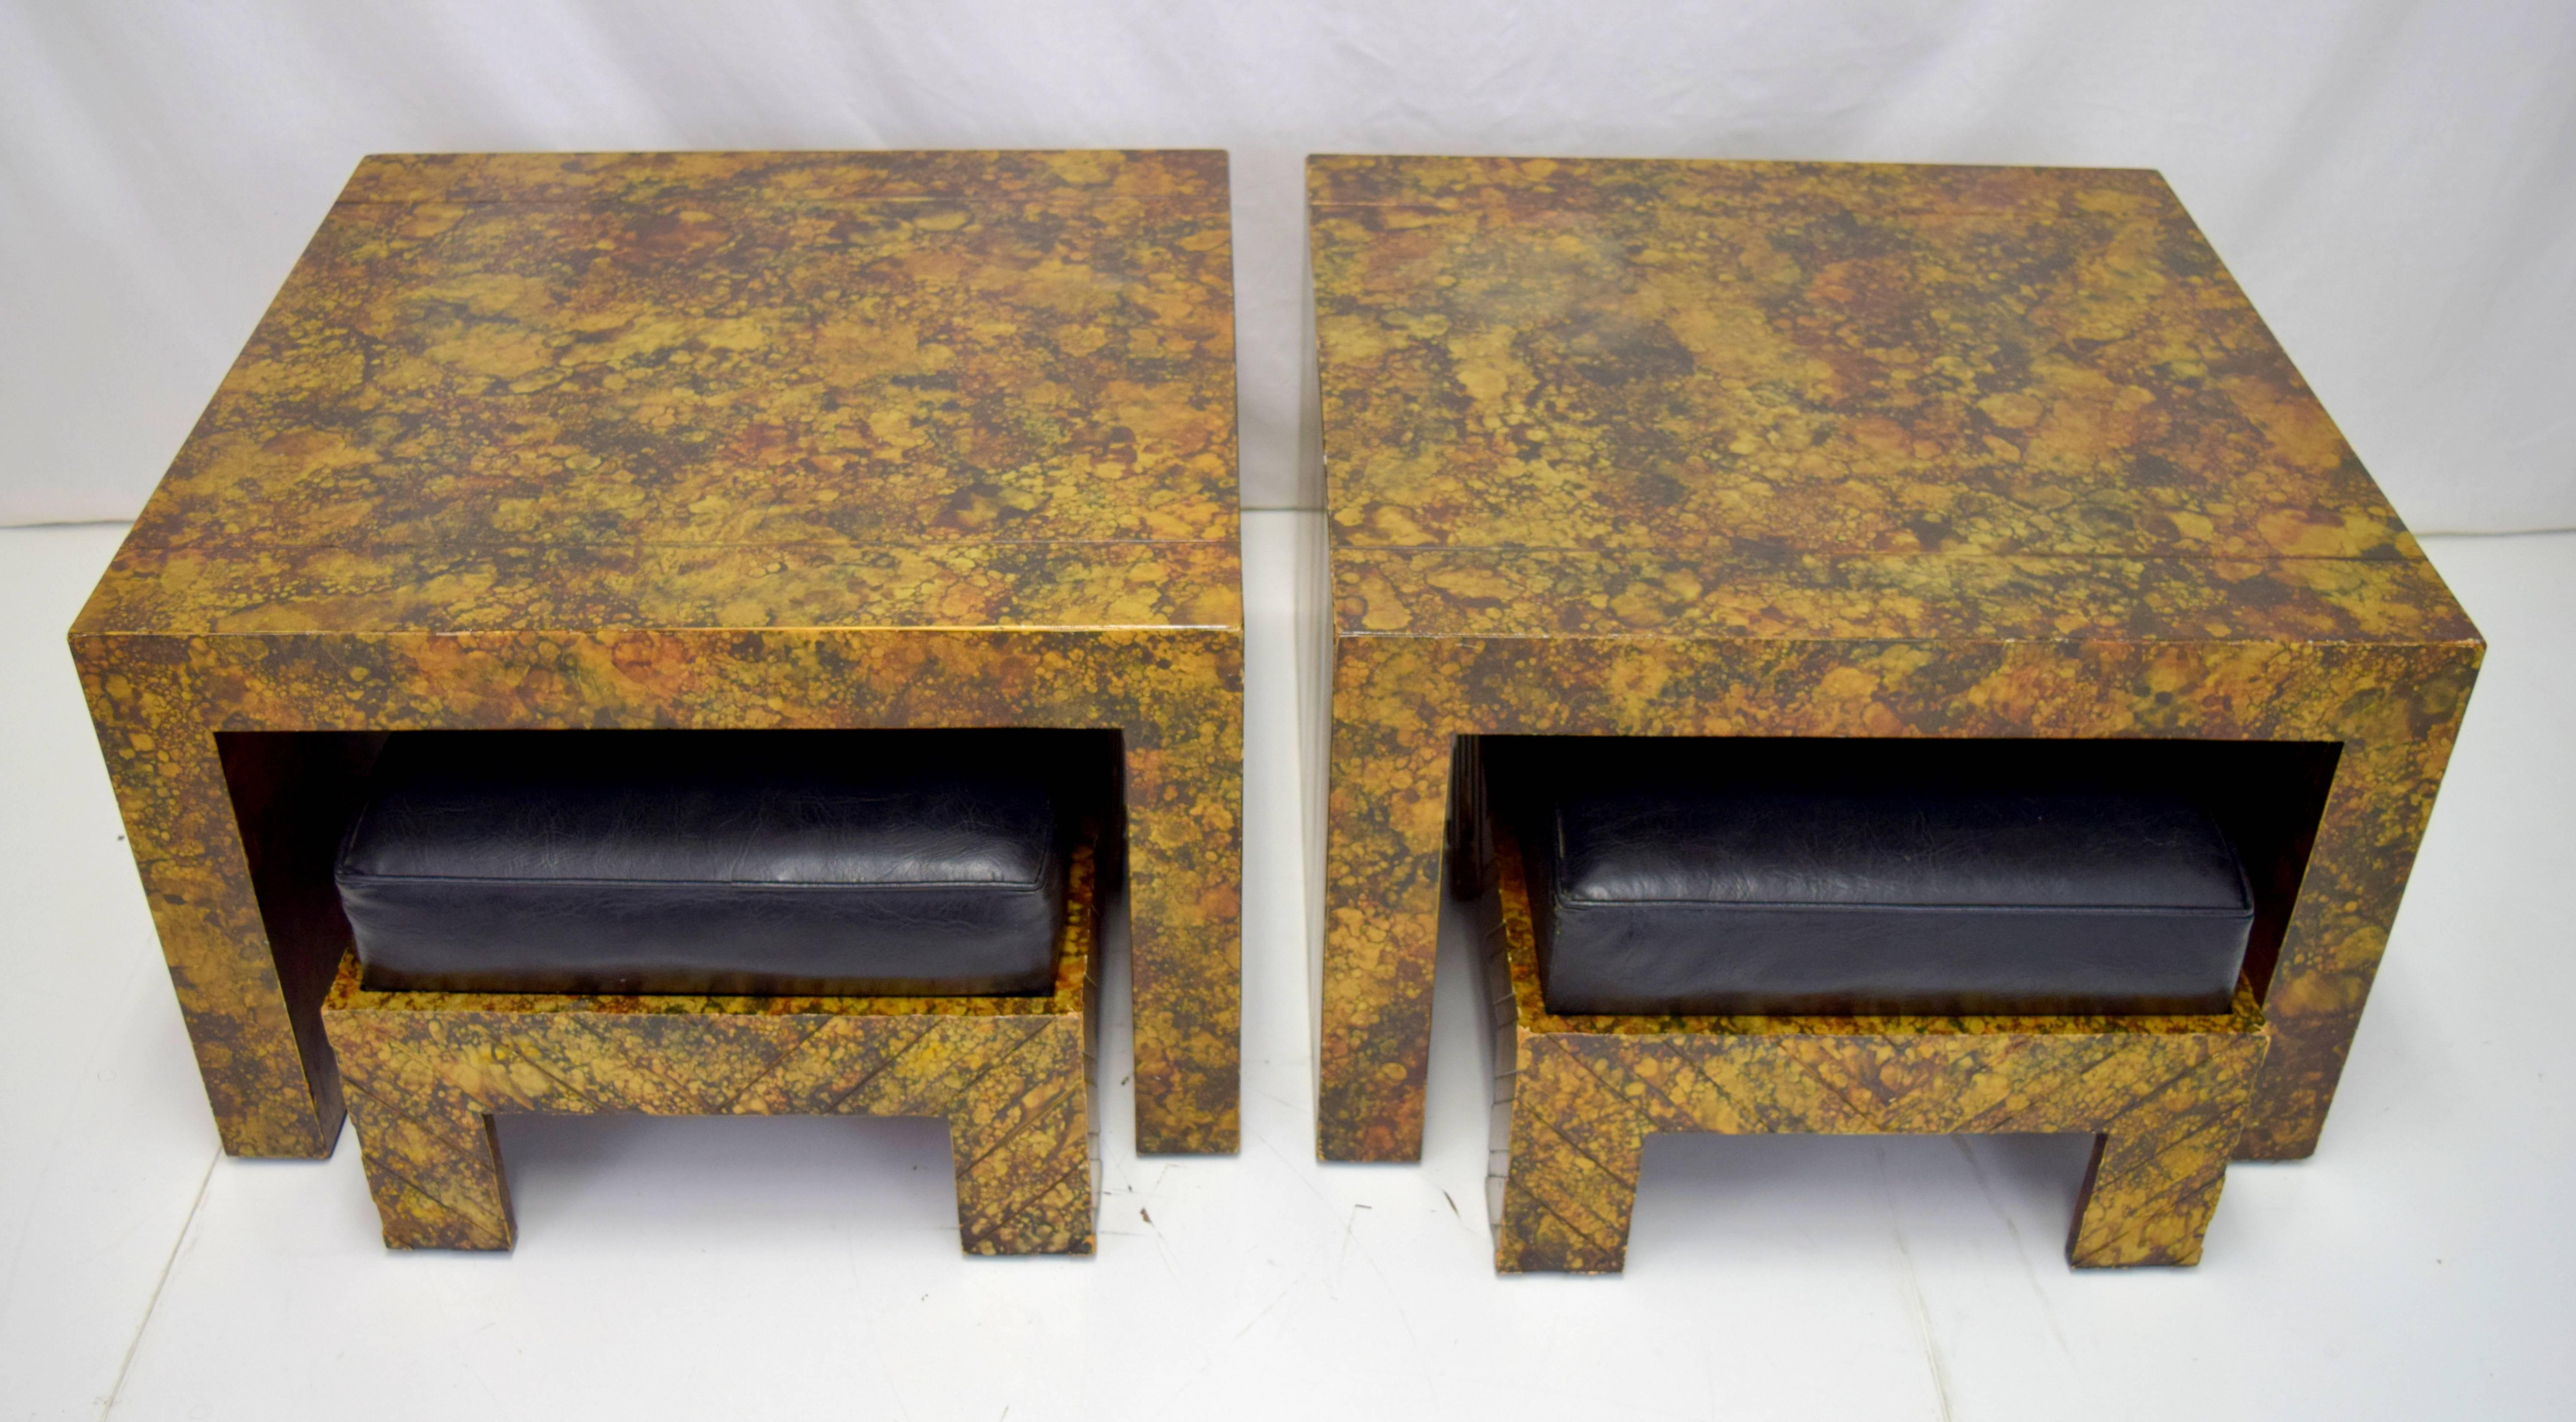 Elegant pair of Hollywood Regency end tables by Phyllis Morris with nesting ottomans. Retains original oil drop or faux tortoise shell finish. Ottomans have removable vinyl pads and chevron incised pattern. All pieces with signed Phyllis Morris.